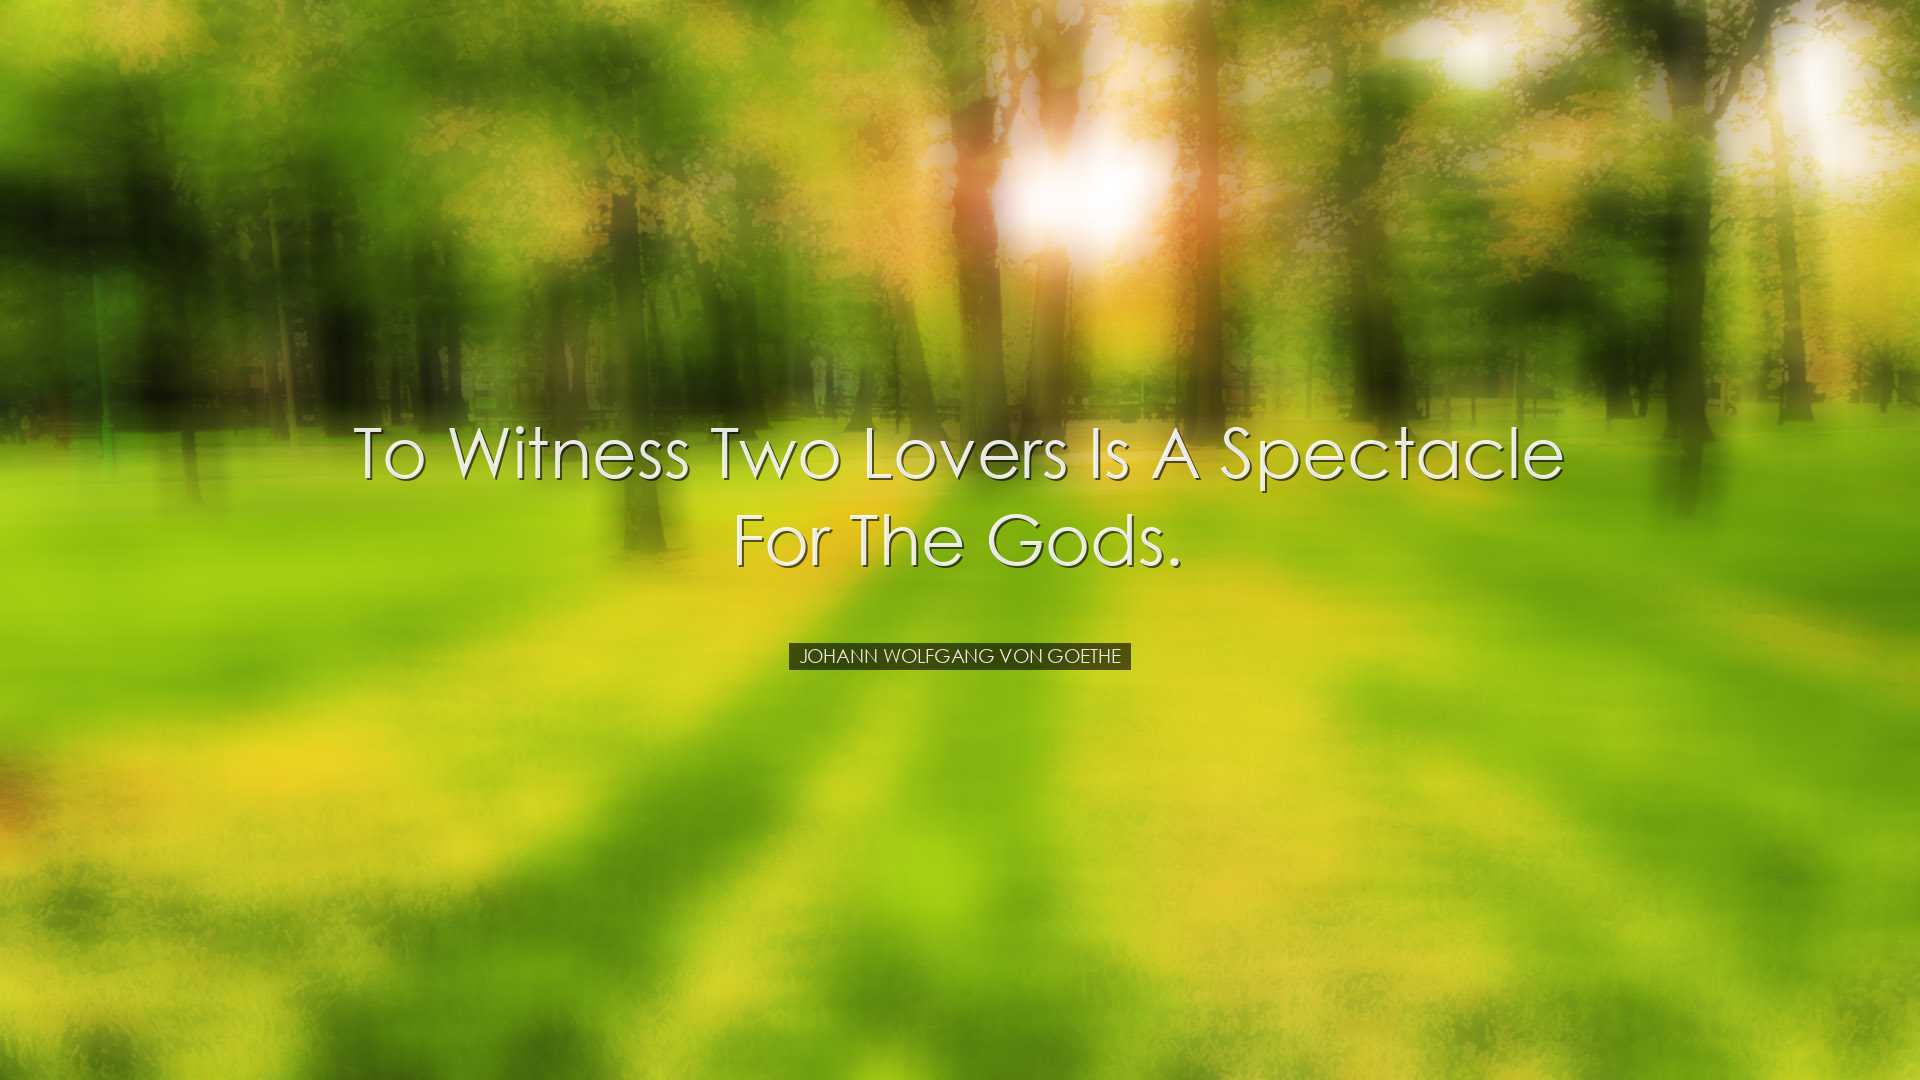 To witness two lovers is a spectacle for the gods. - Johann Wolfga